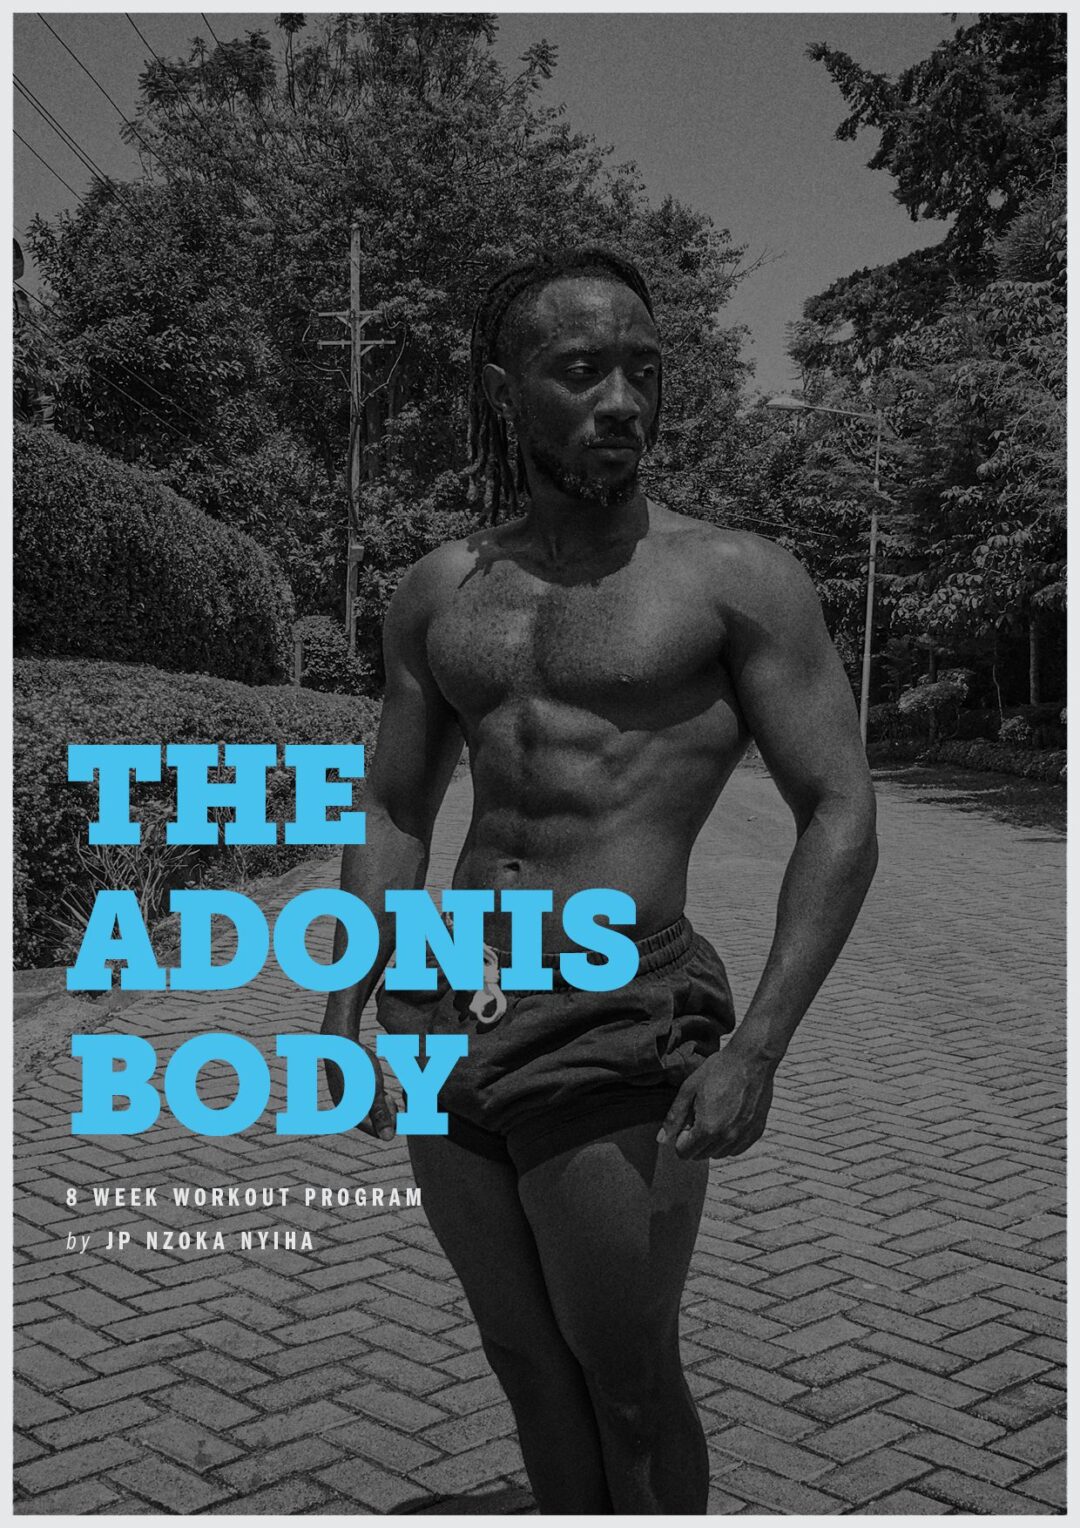 THE "ADONIS" BODY FREE HOME WORKOUT PROGRAM